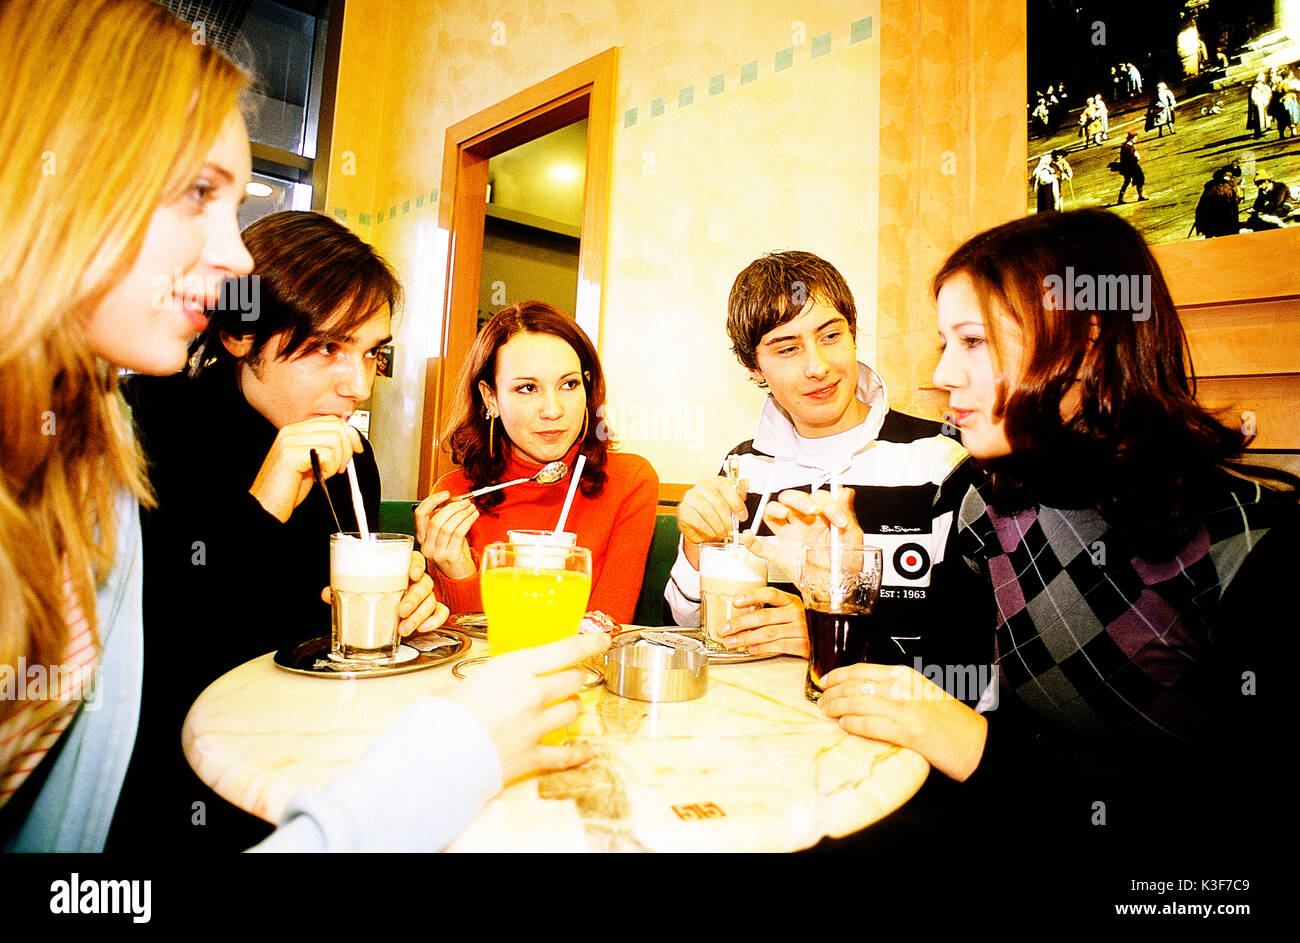 Group of young persons at the cafe Stock Photo